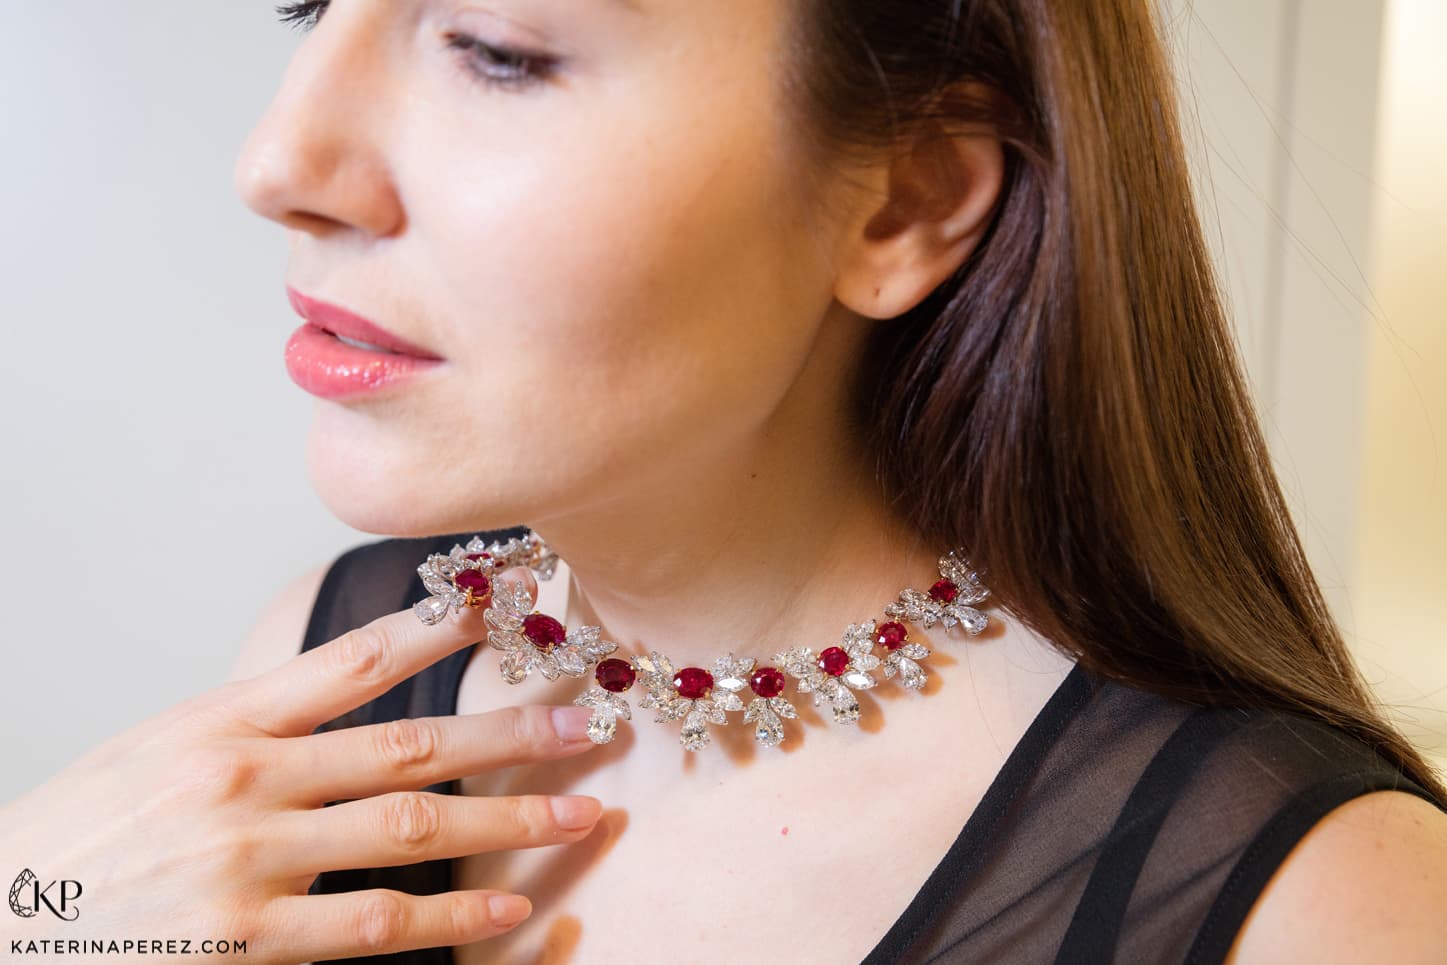 Faidee 'The Grand Phoenix' necklace with Burmese pigeon's blood rubies and 100.21ct diamonds in white gold